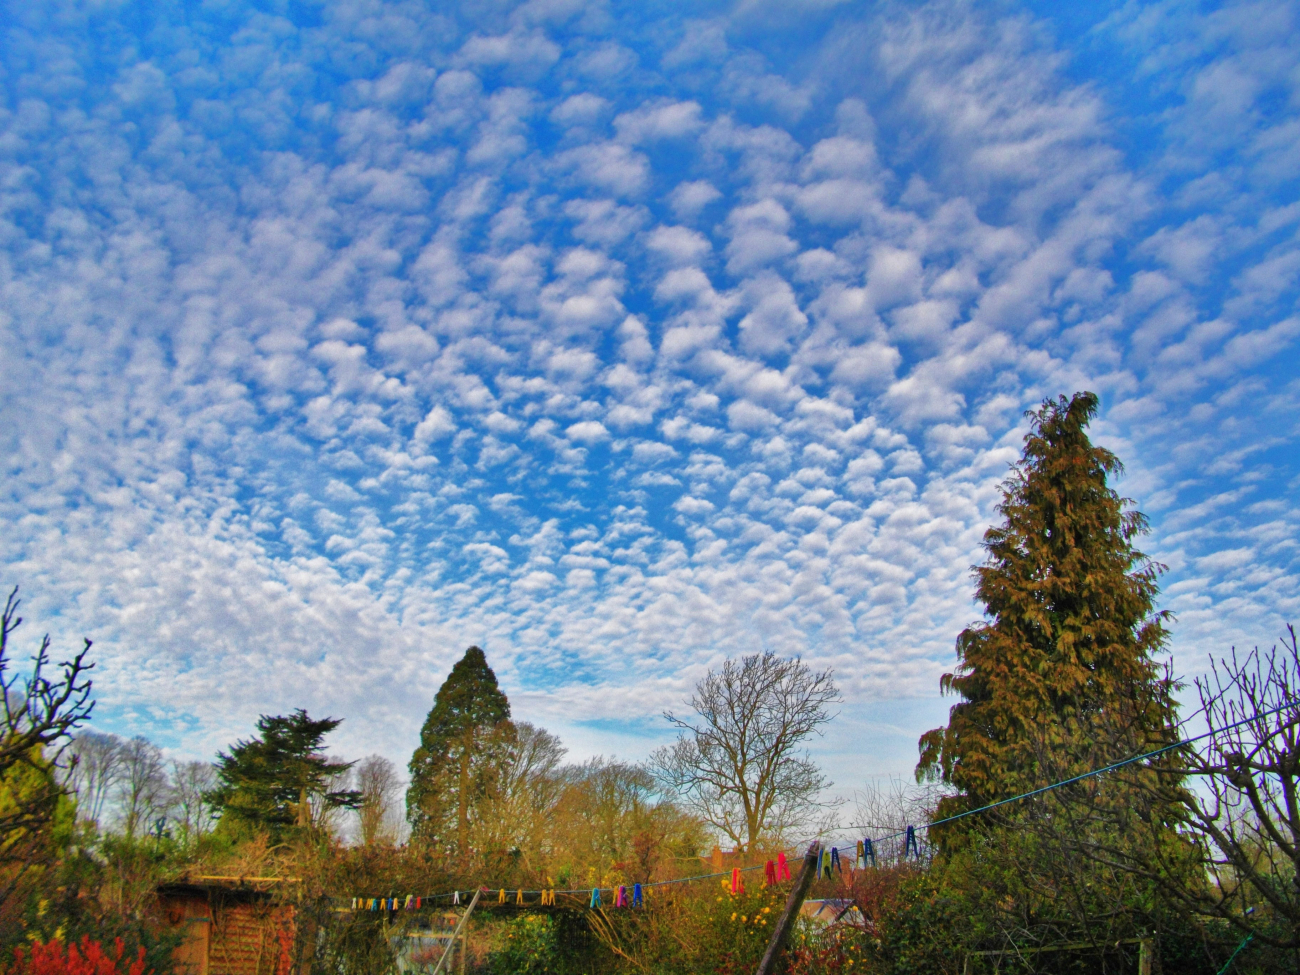 The perfect sky, altocumulus clouds also known as mackerel sky